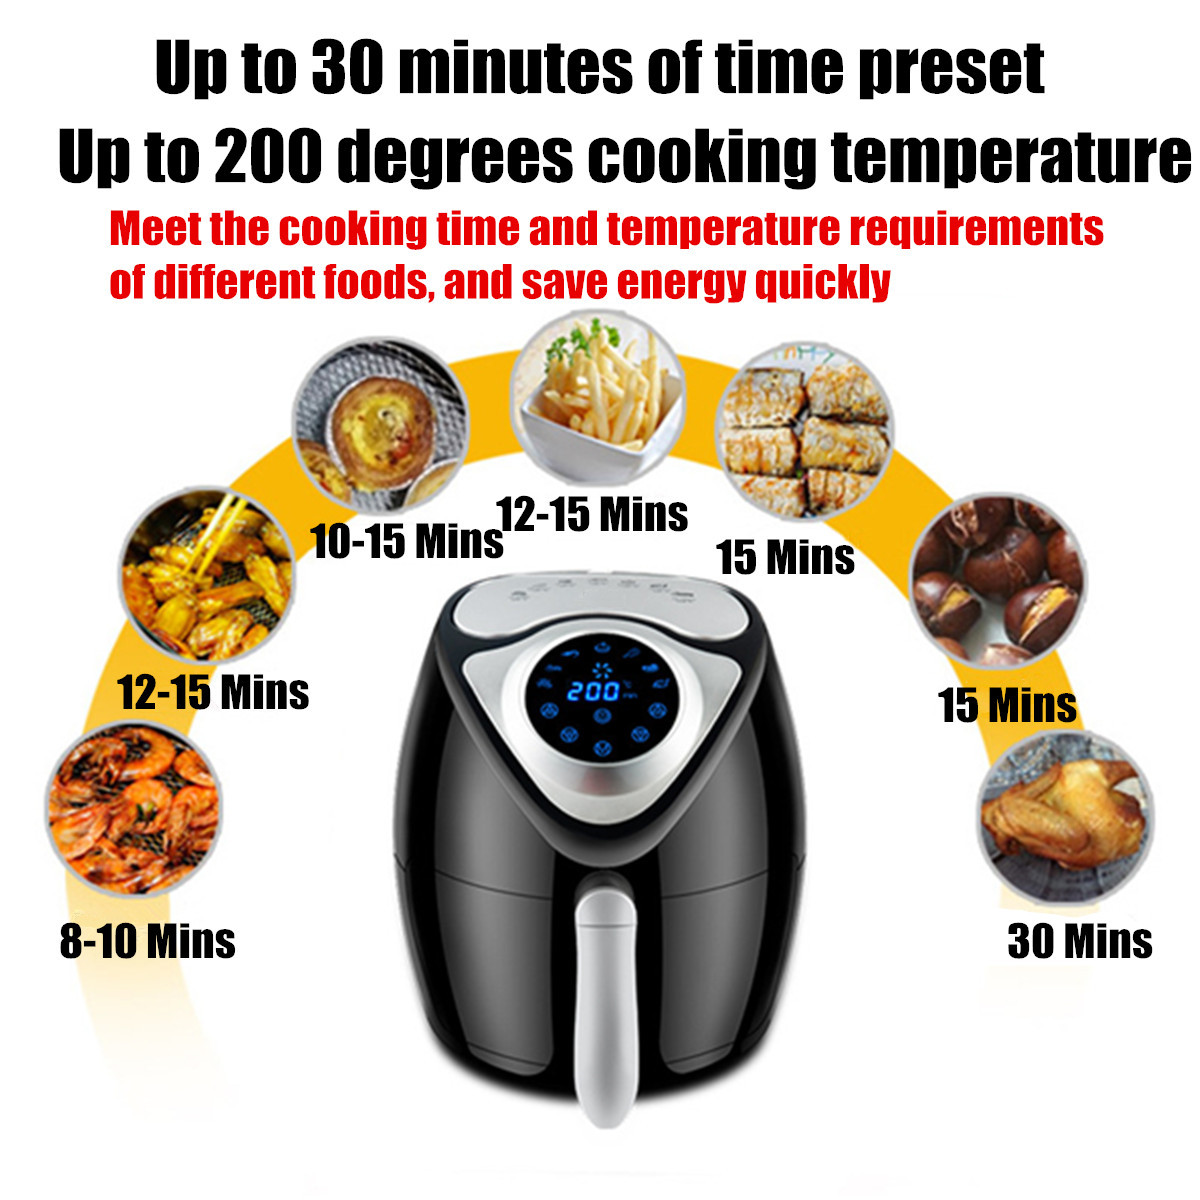 1700W-Electric-Air-Fryer-Digital-Timer-Temp-Control-61-Quart-Oil-free-Touch-Screen-Fried-Food-for-Ho-1658492-10